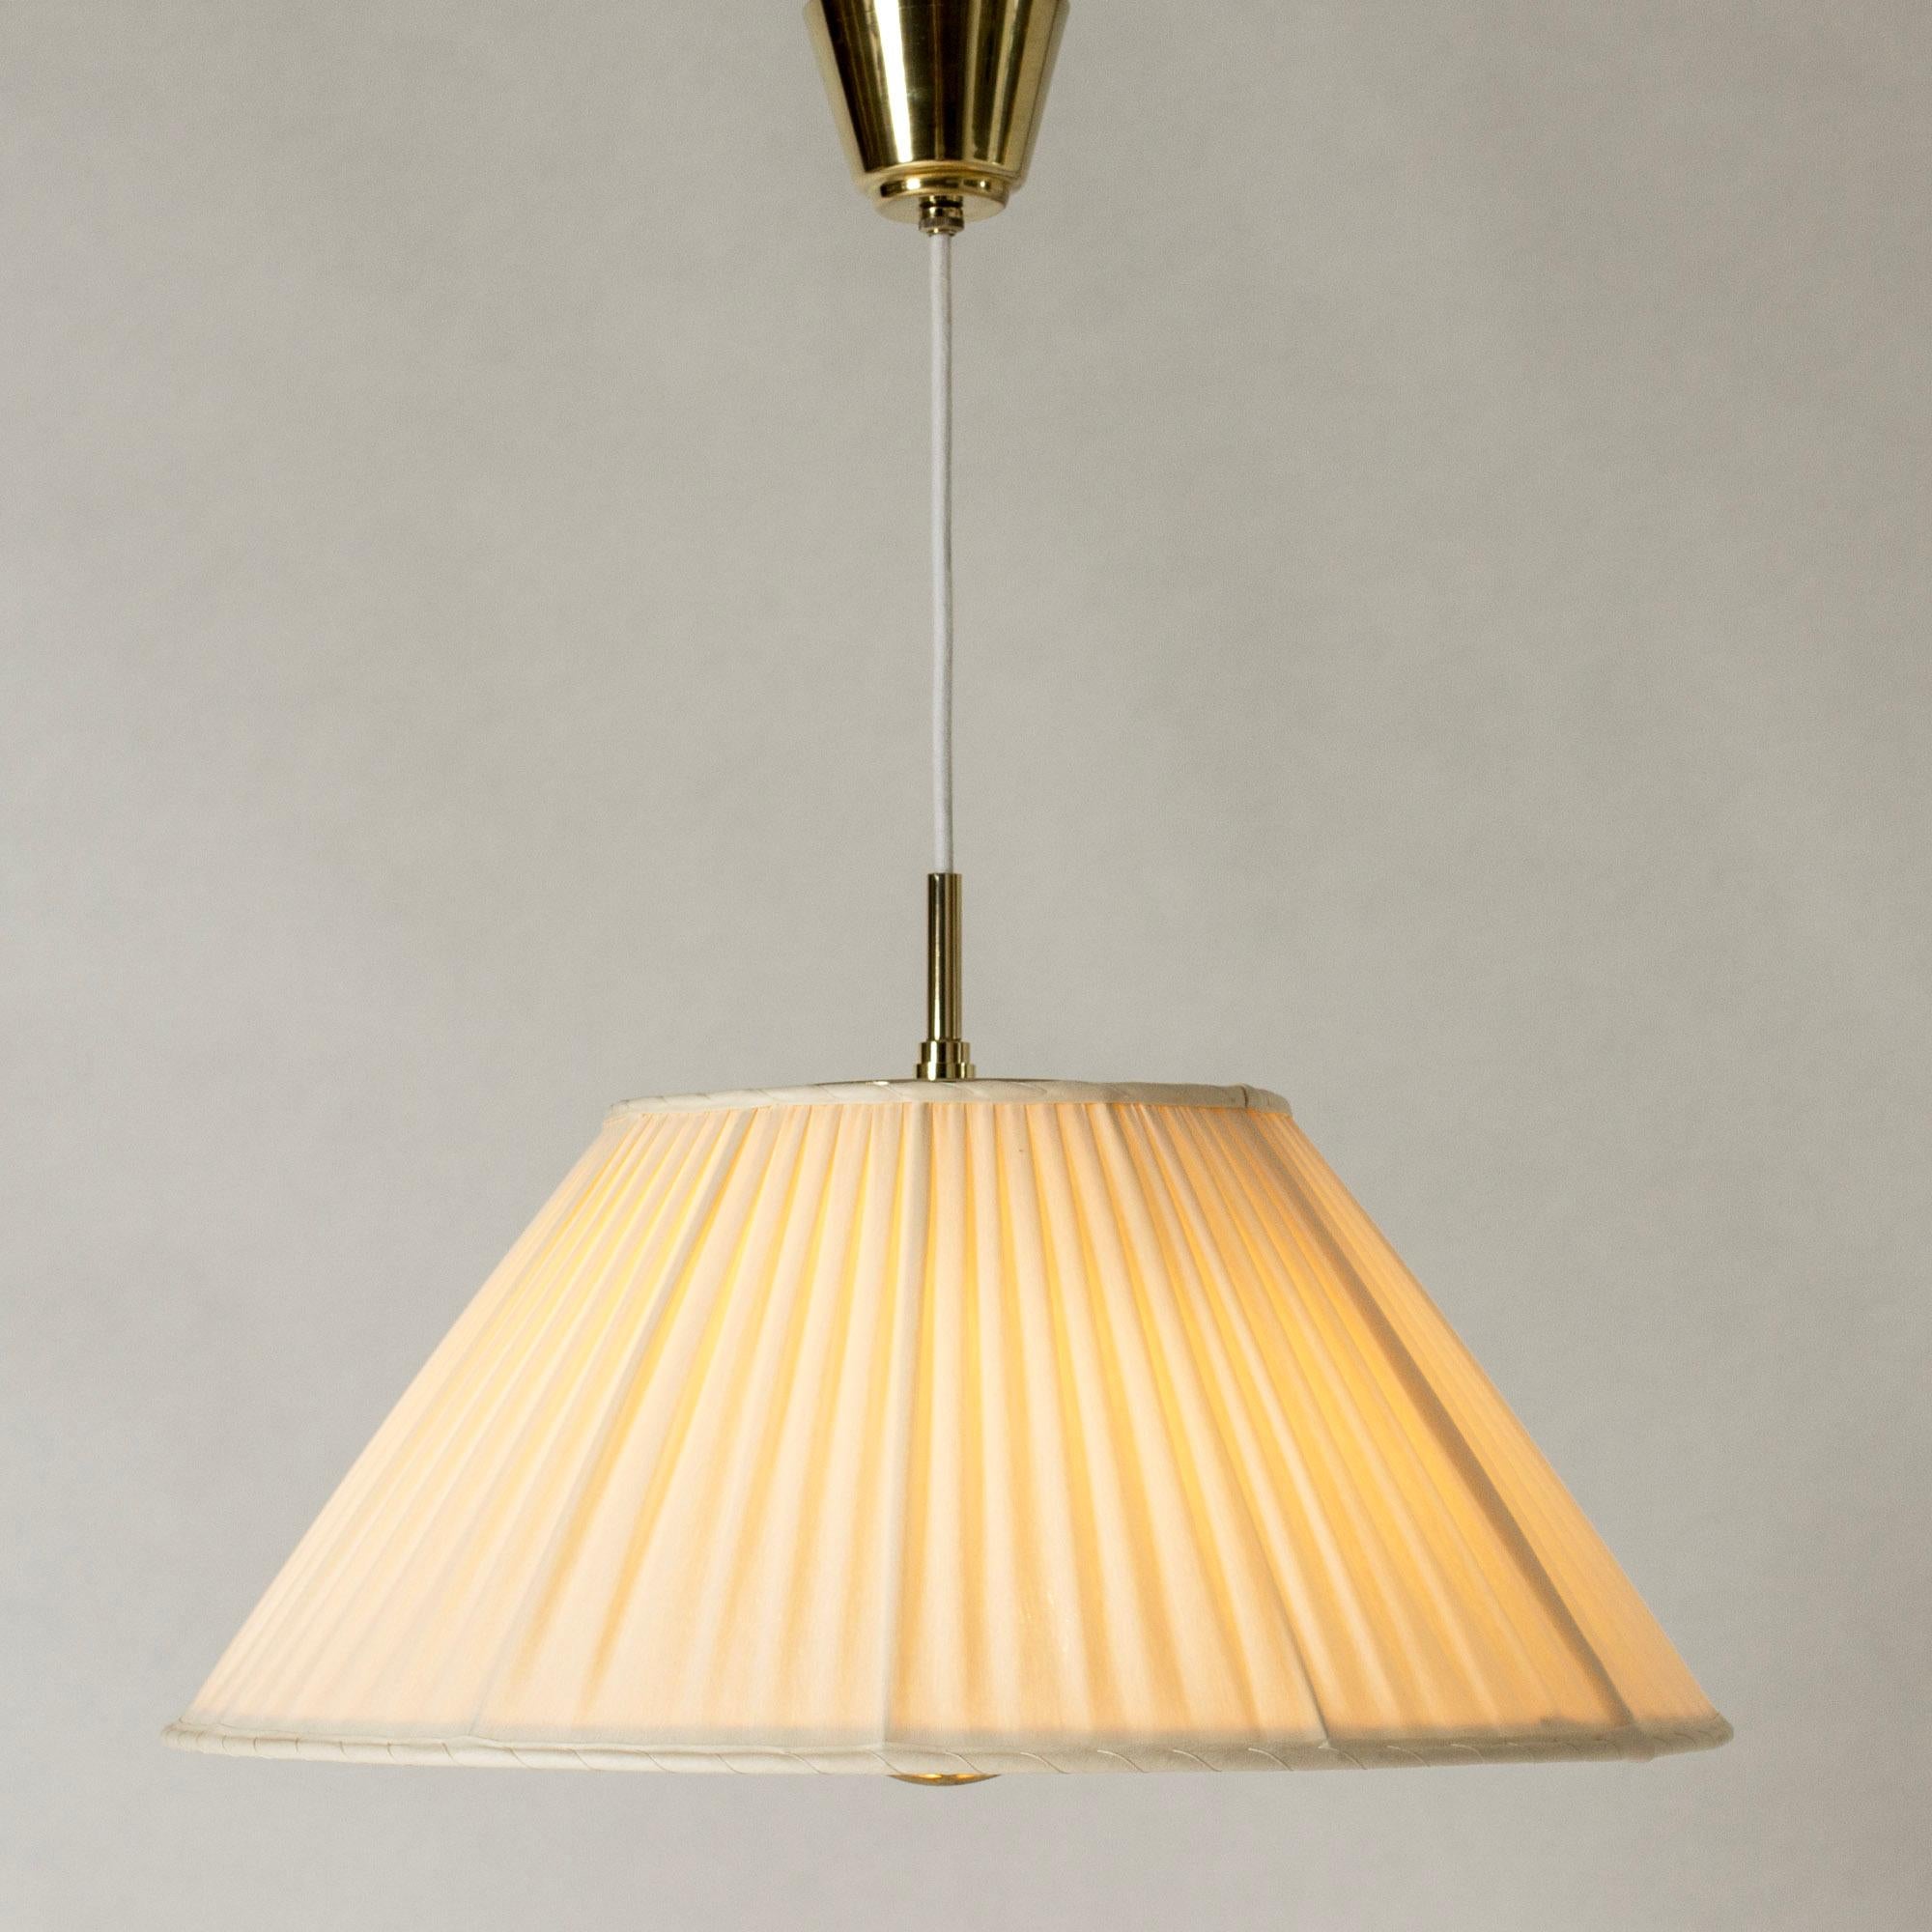 Beautiful brass pendant light by Josef Frank, in an elegant, voluminous design. Shade made from pleated fabric. A decorative brass “anchor” comes out through the bottom of the shade and can be pulled to adjust the length of the chord.

Length of